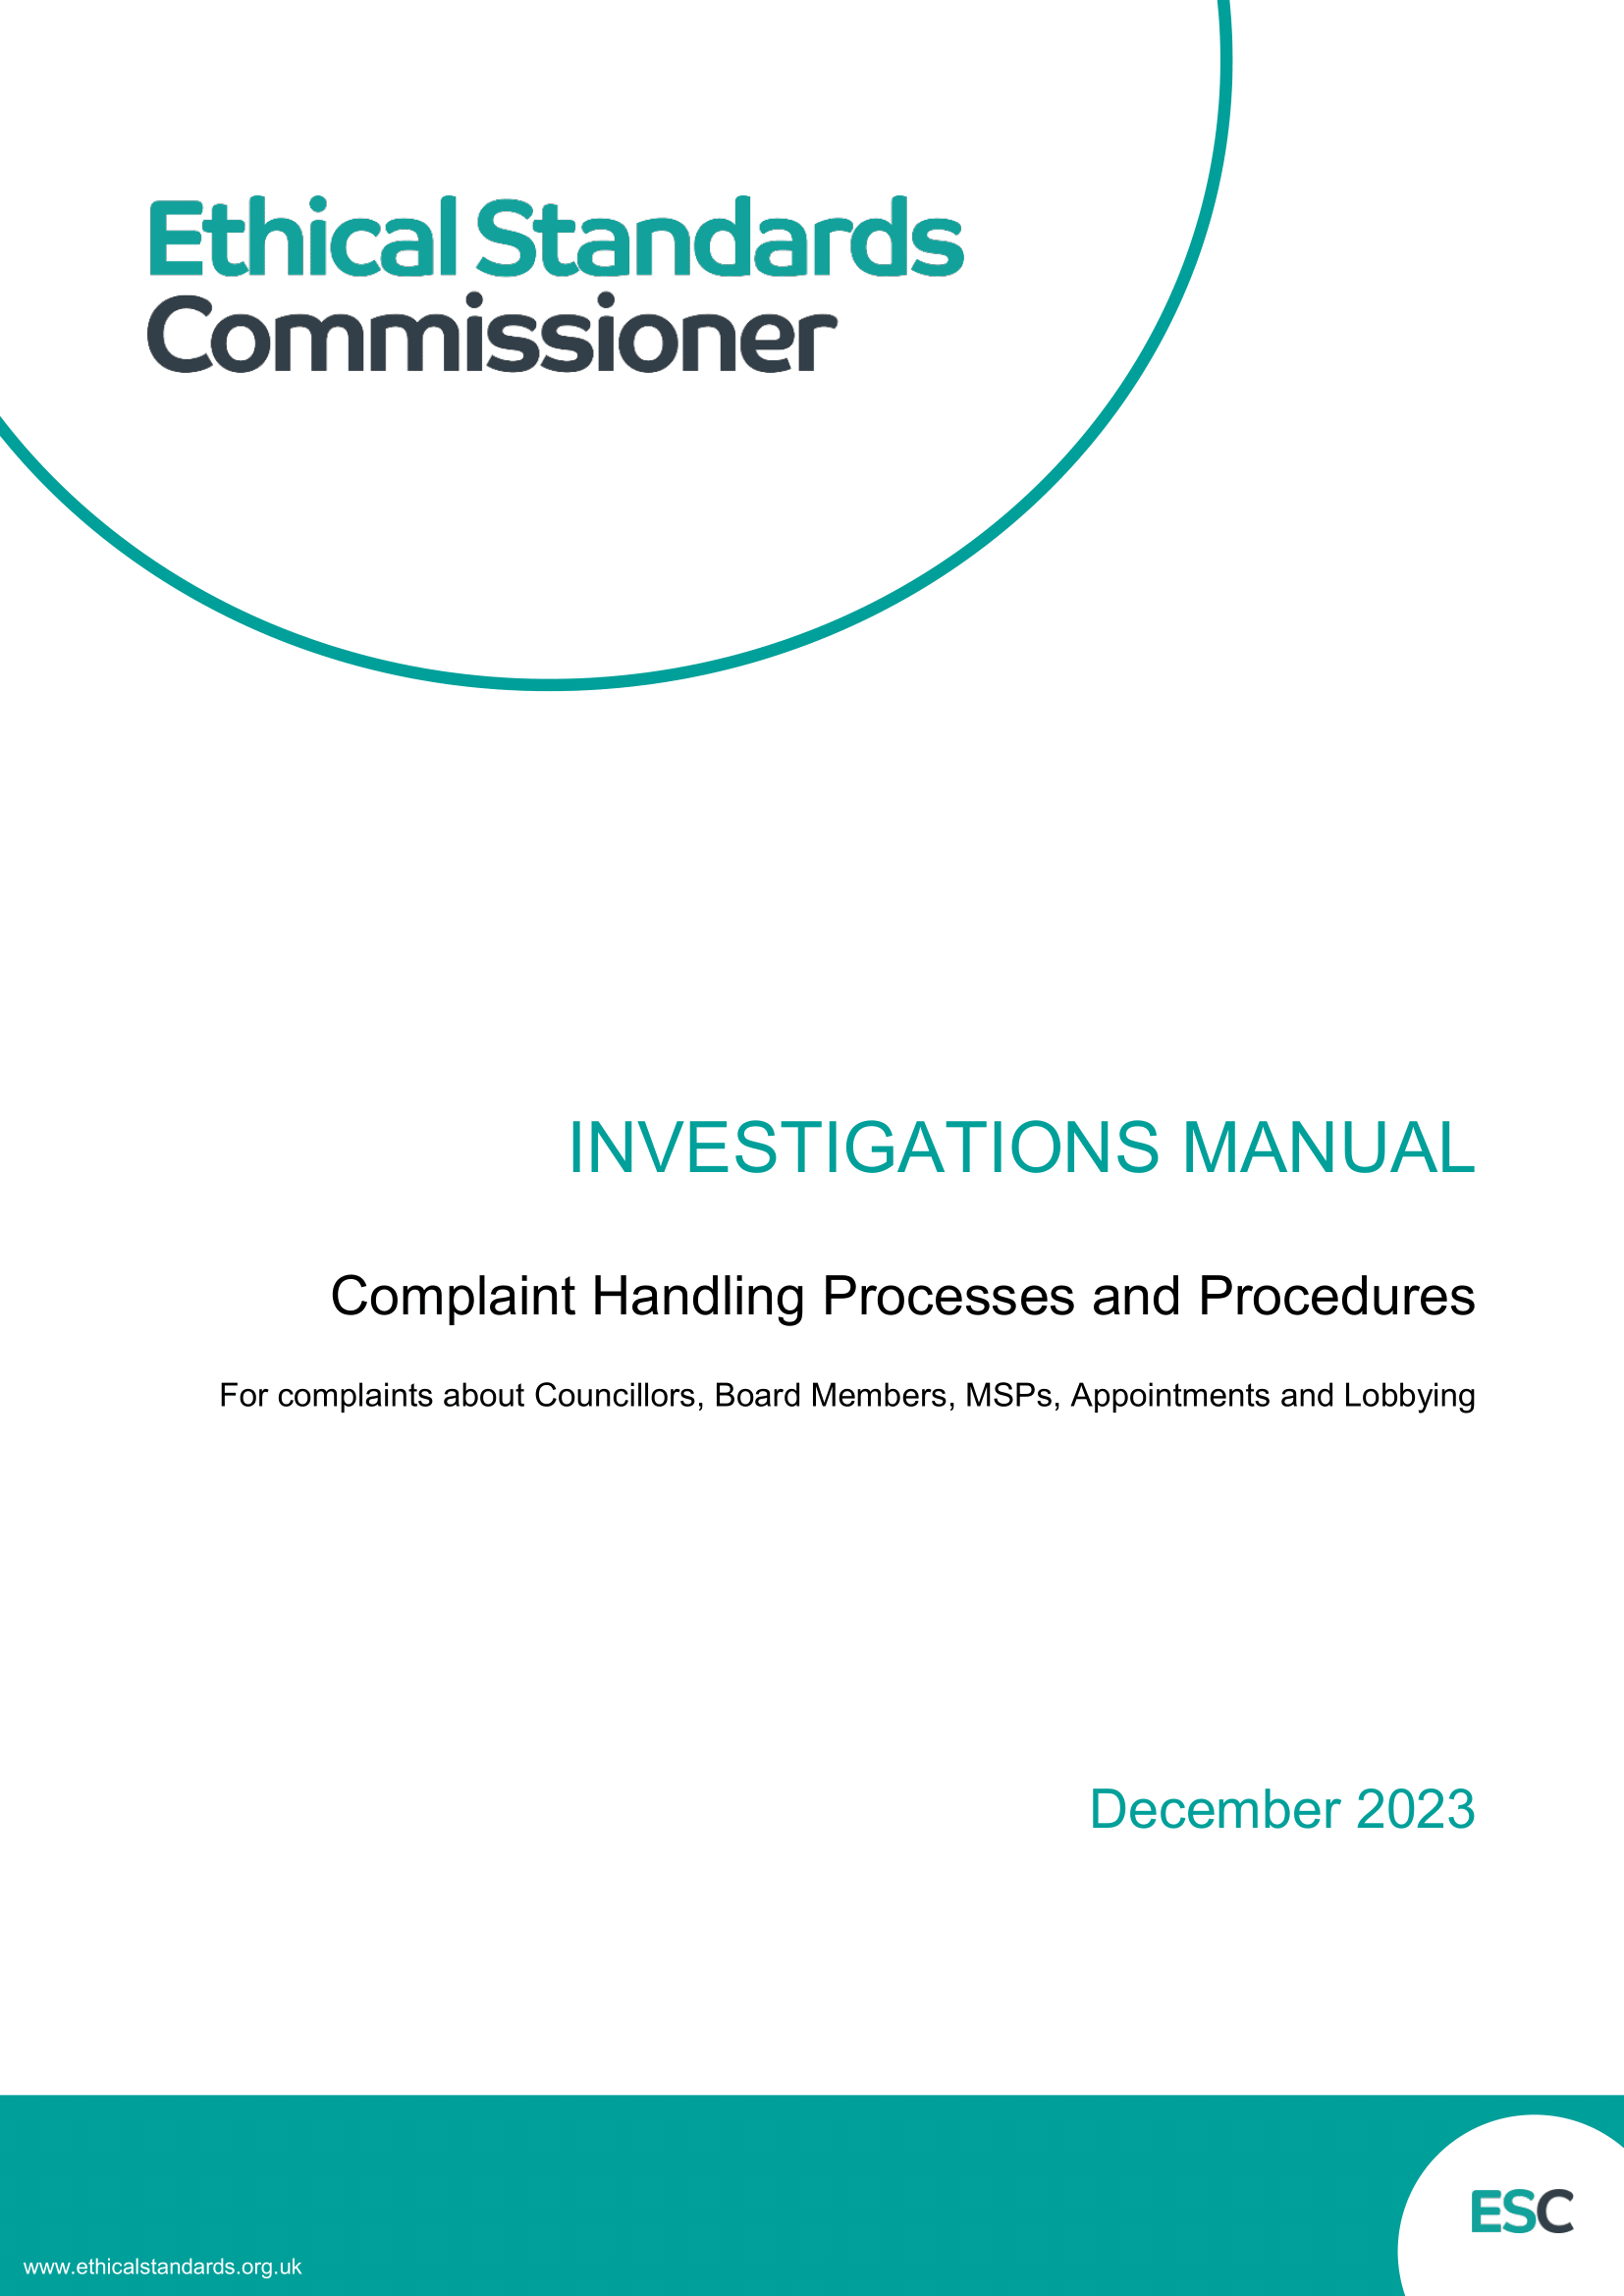 Cover Page of Revised Manual